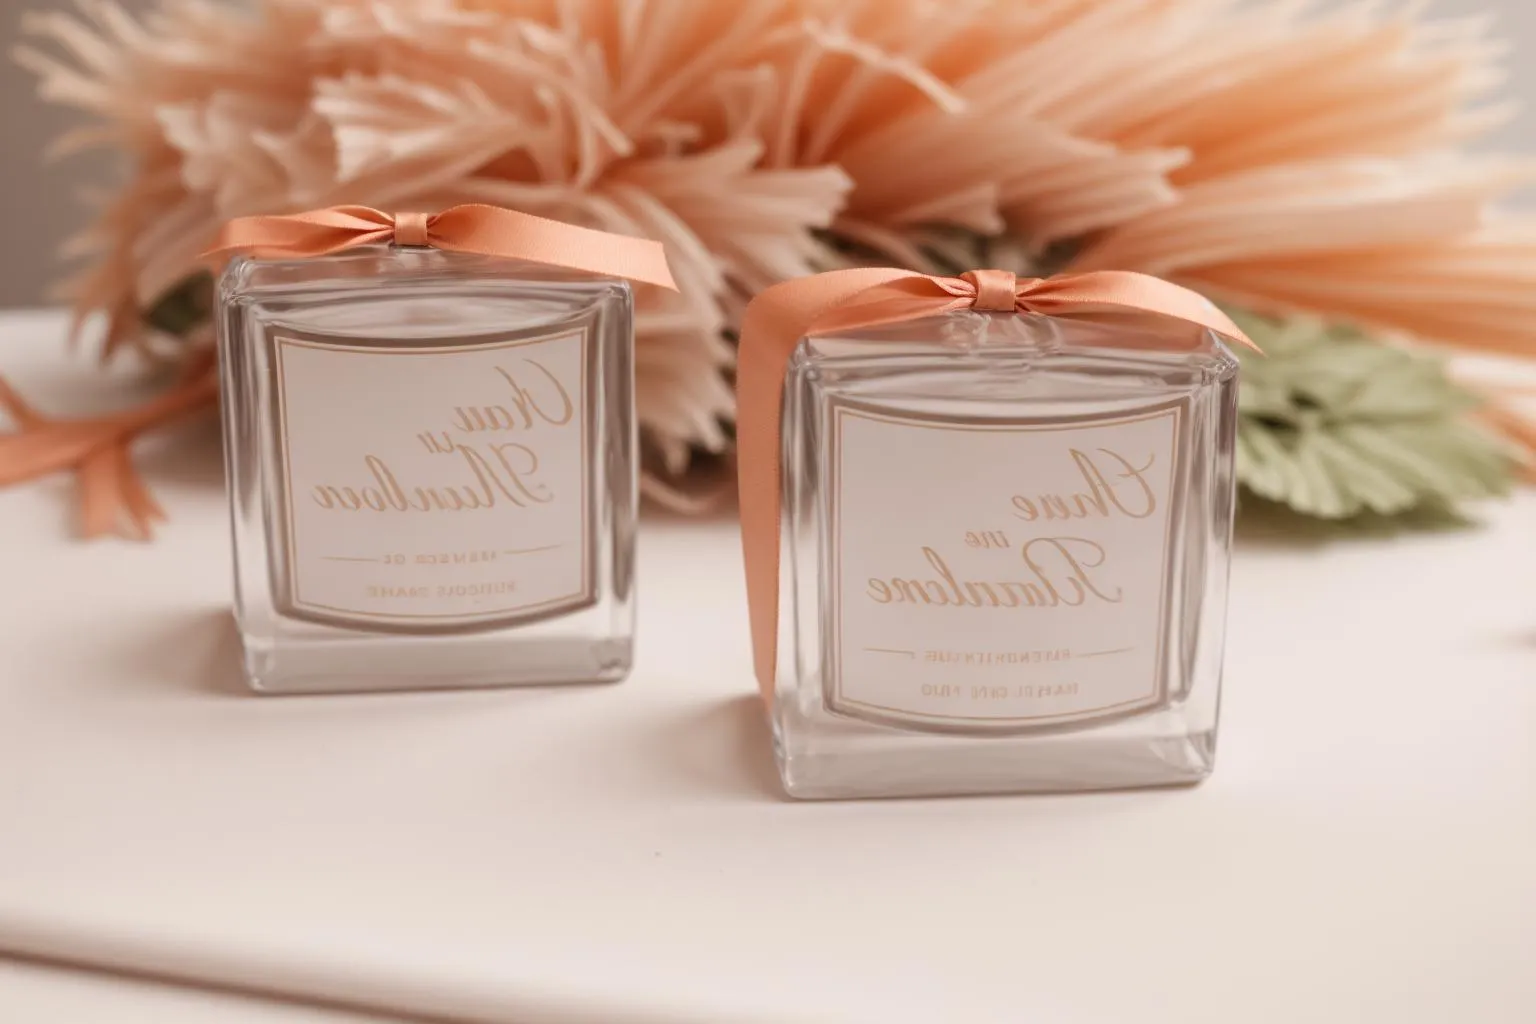 Souvenir Wedding Lilin Aroma Terapi ]Scented Candle in a Glass